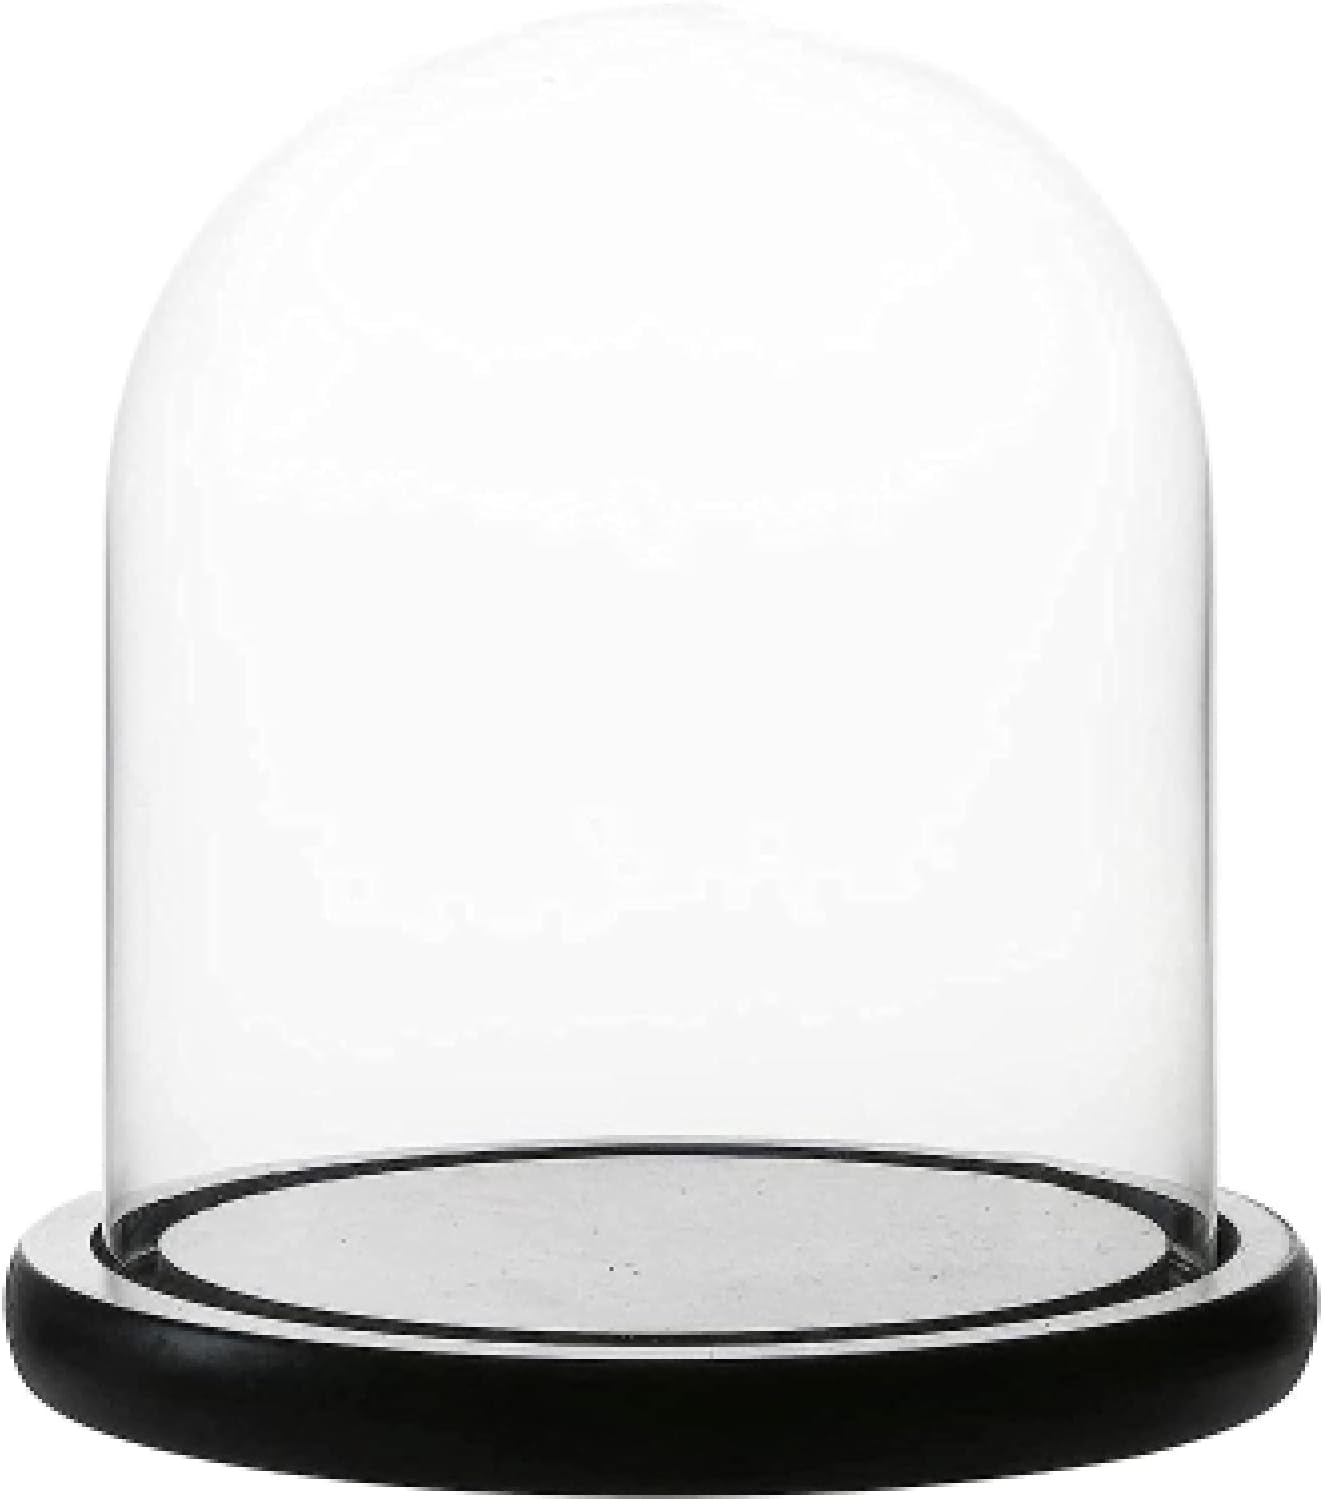 WHOLE HOUSEWARES | Decorative Clear Glass Dome/Tabletop Centerpiece | Cloche Bell Jar Display Dome Case with Black Wooden MDF Base for Candles | 5.7 D X 10.4 H Glass Dome Display